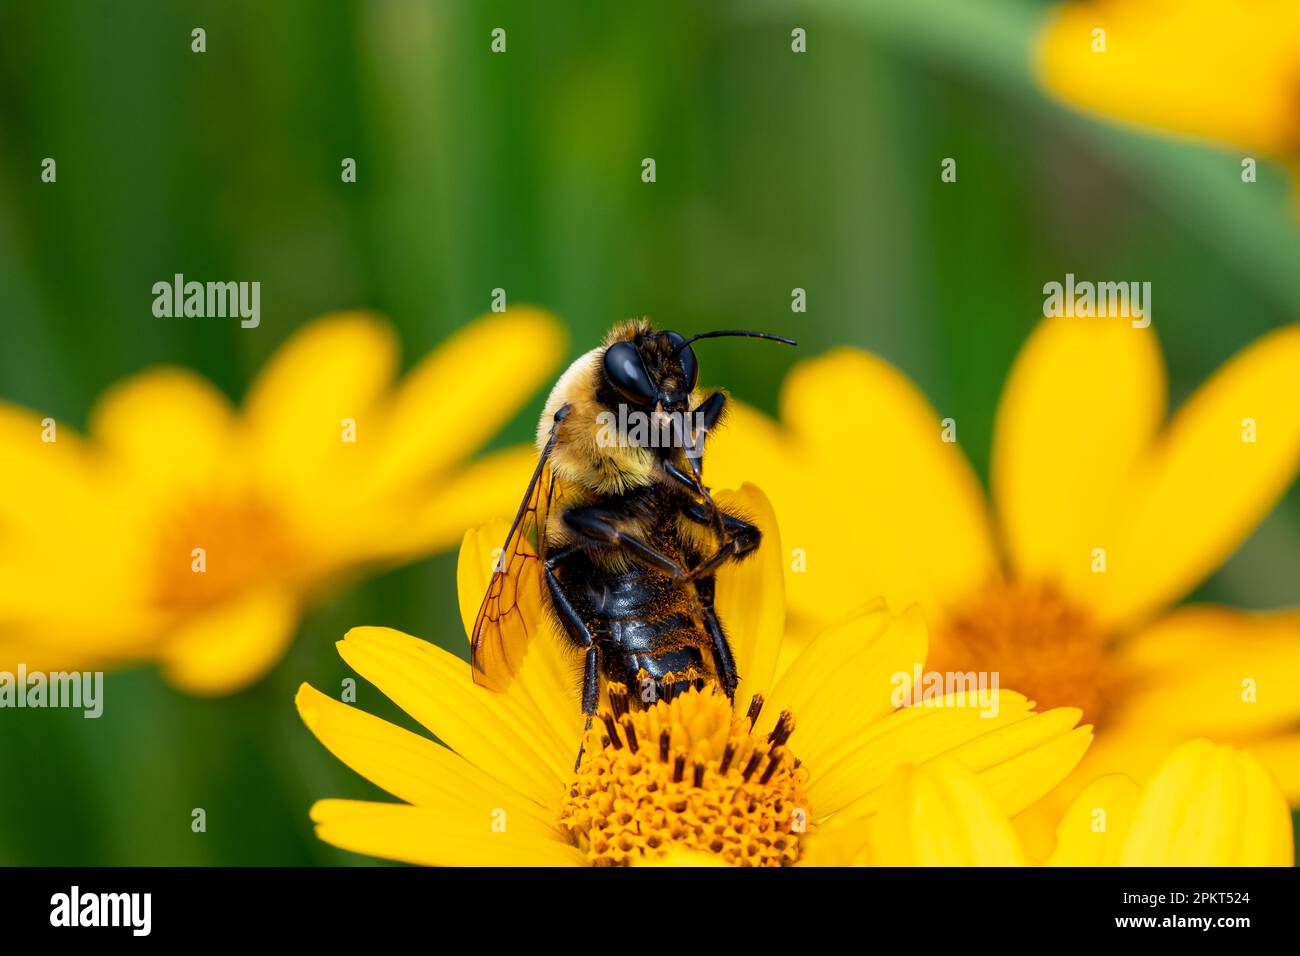 Bumble bee resting on yellow wildflower. Insect and nature conservation, habitat preservation, and backyard flower garden concept. Stock Photo